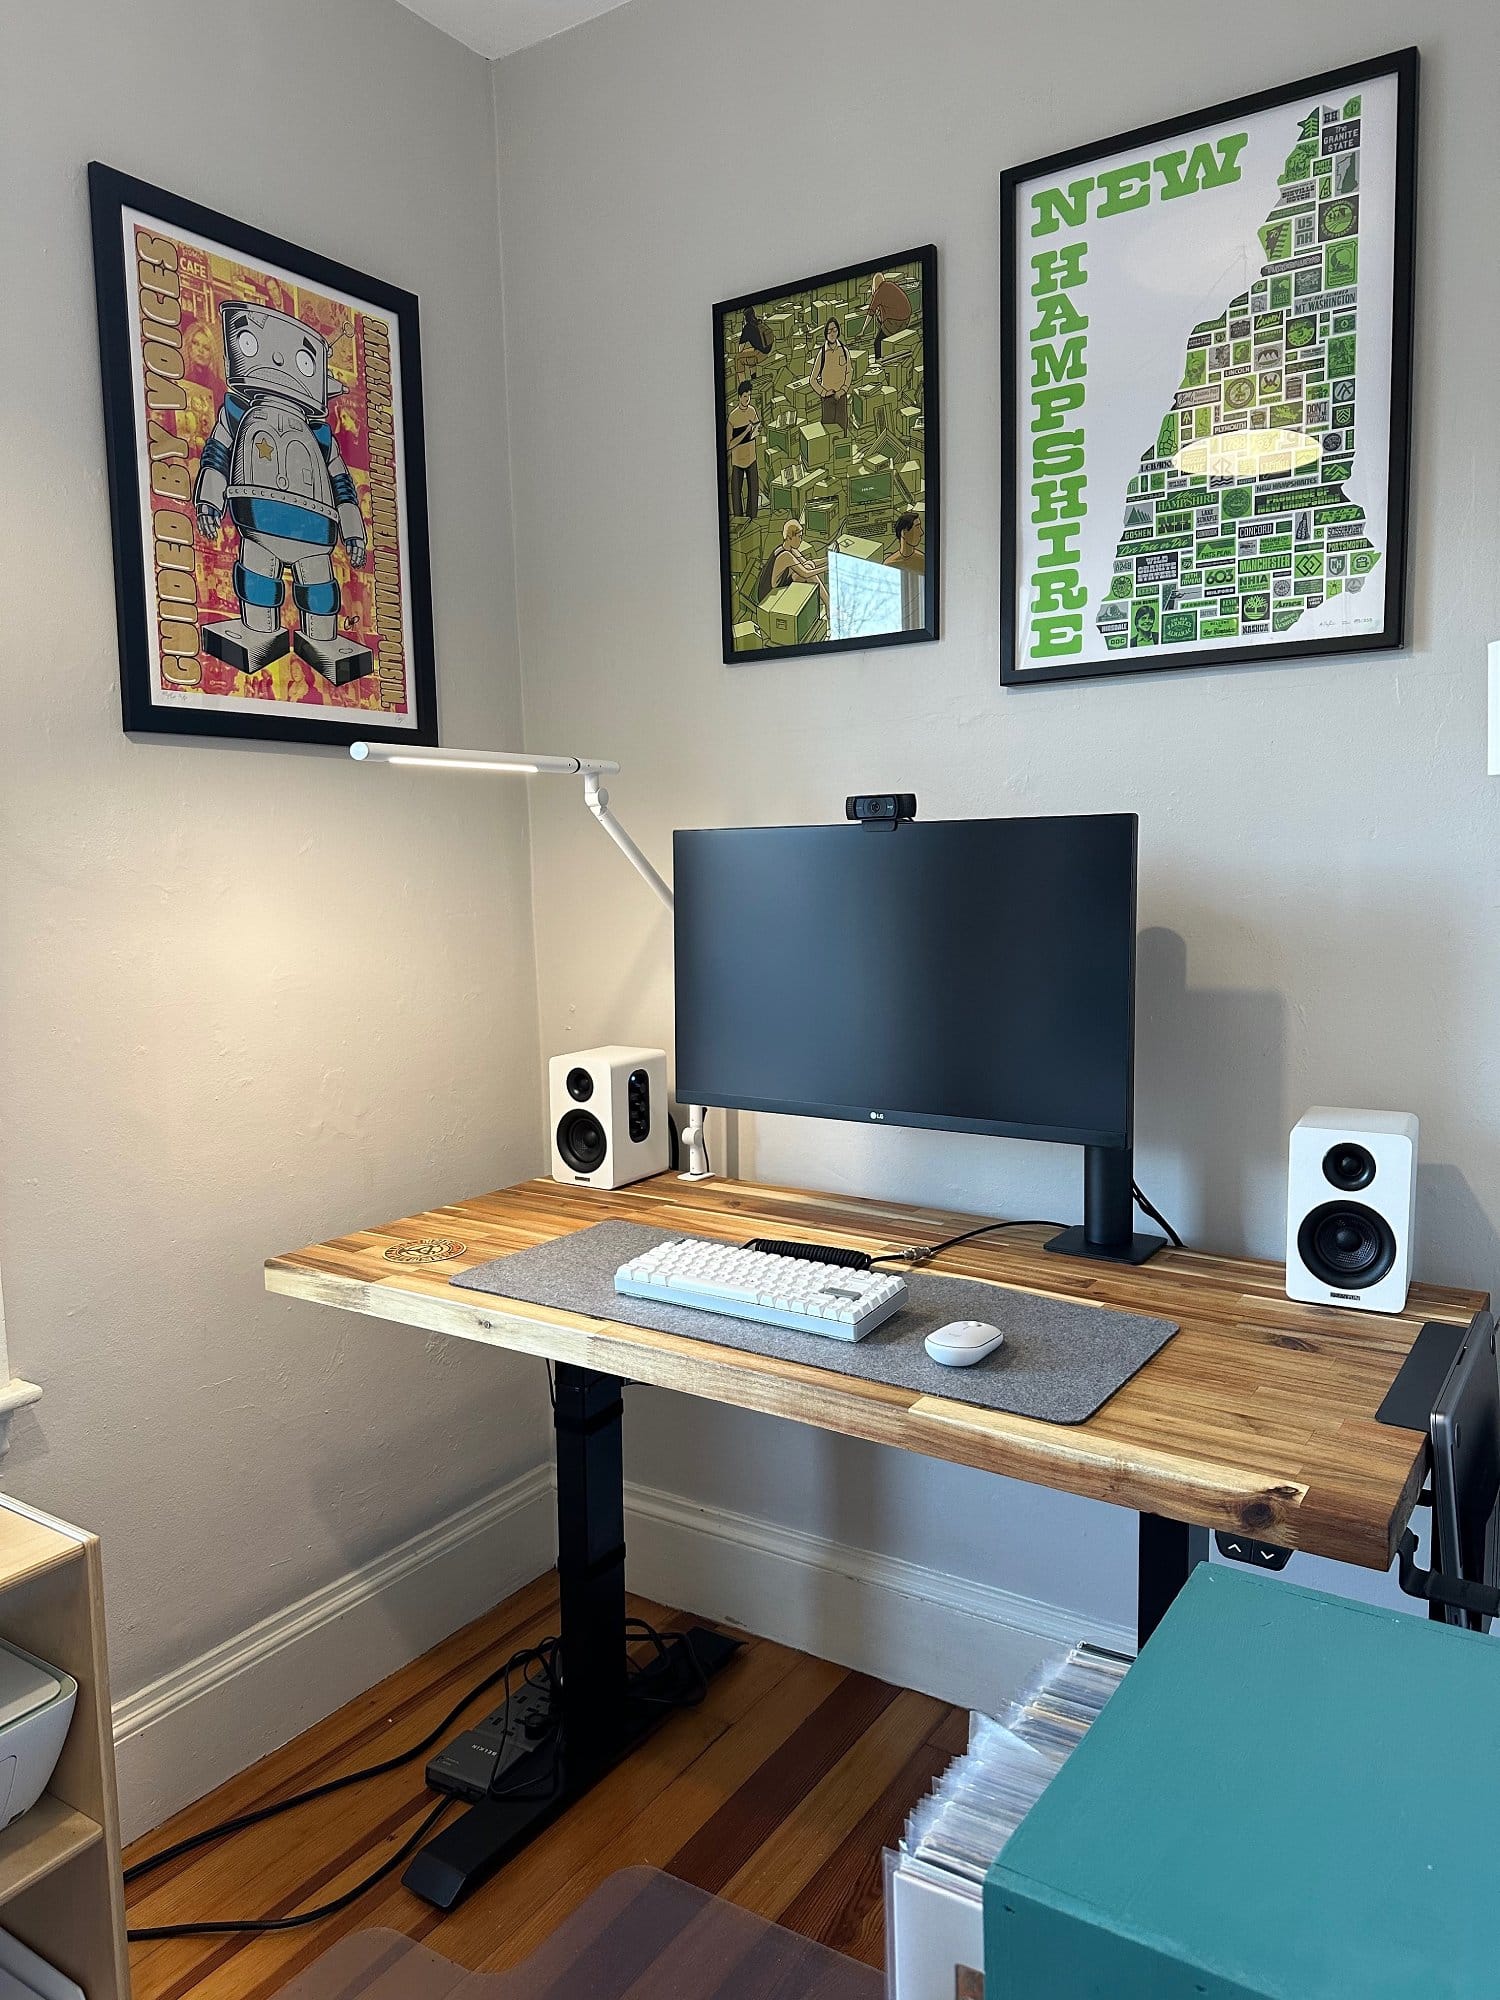 A home office corner with a height-adjustable desk holding a computer monitor and speakers, flanked by framed artwork on the walls